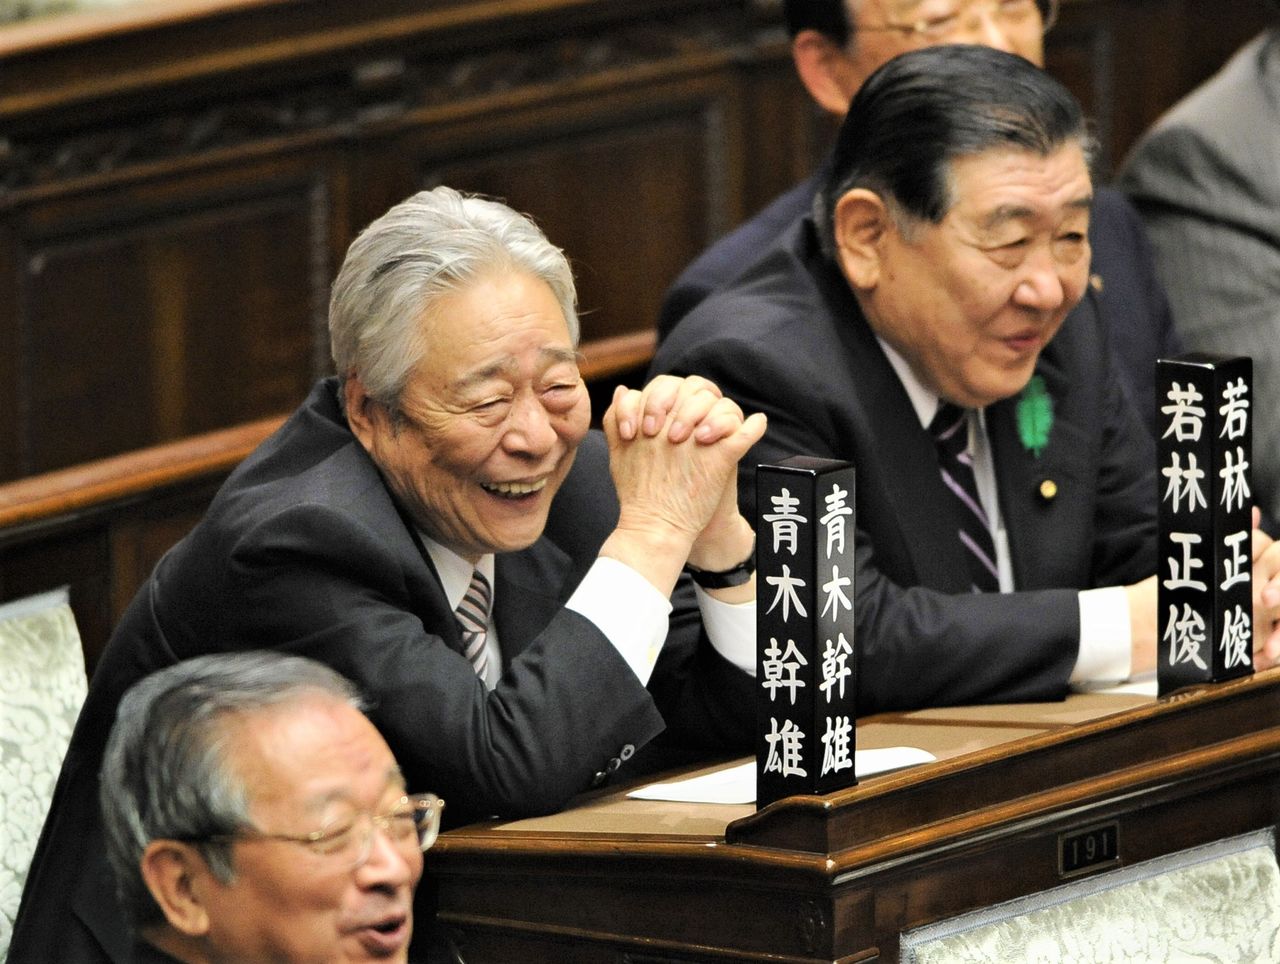 Aoki Mikio, who was known as the “don of the upper house,” pictured at center left in January 2010. (© Jiji)